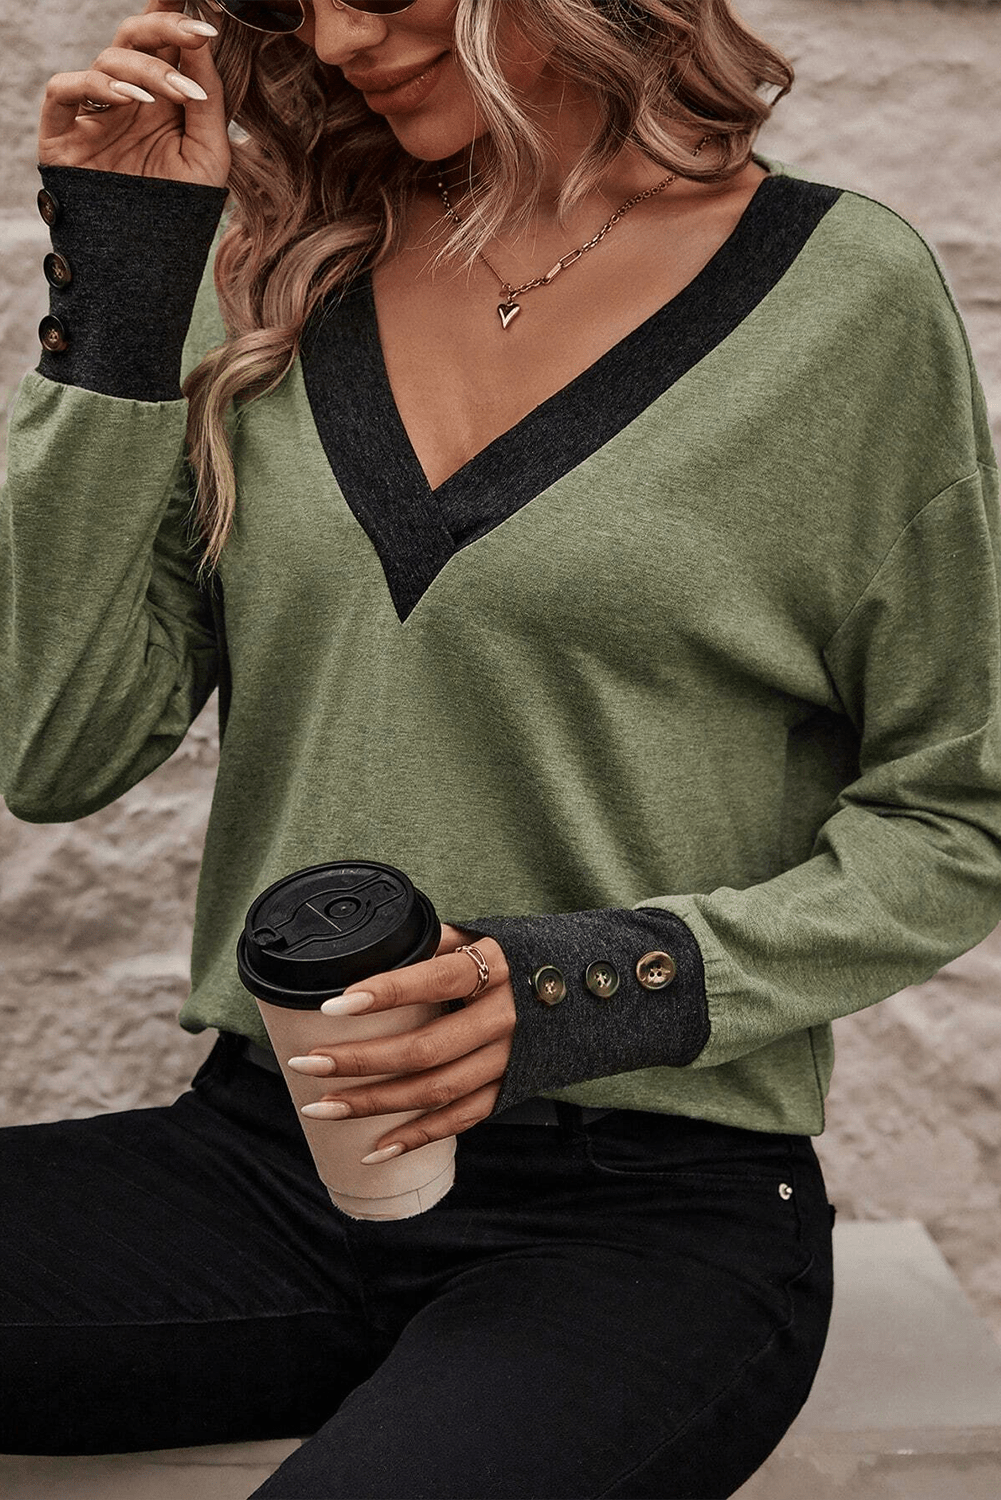 The802Gypsy  Tops Traveling Gypsy Cuffed Long Sleeve Top